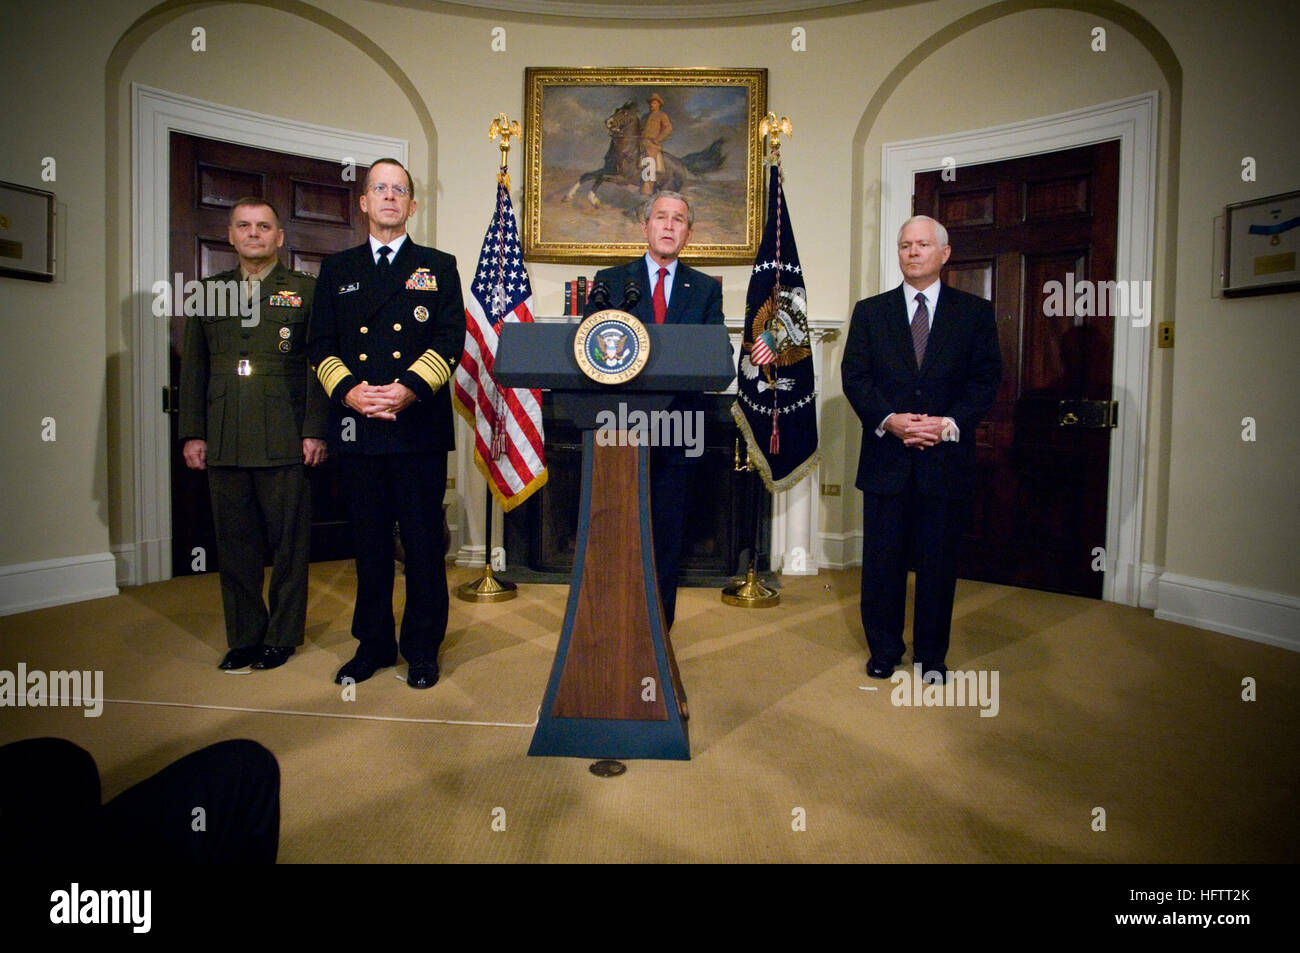 070628-N-0696M-113 WASHINGTON, D.C. (June 28, 2007) - President George W. Bush announces the nomination of current Chief of Naval Operations (CNO) Adm. Mike Mullen and Commander, United States Strategic Command, Gen. James E. Cartwright as Chairman and Vice-Chairman of the Joint Chiefs of Staff, respectively. The ceremony was held in the Roosevelt Room at the White House. U.S. Navy photo by Mass Communication Specialist 1st Class Chad J. McNeeley (RELEASED) US Navy 070628-N-0696M-113 President George W. Bush announces the nomination of current Chief of Naval Operations (CNO) Adm. Mike Mullen a Stock Photo